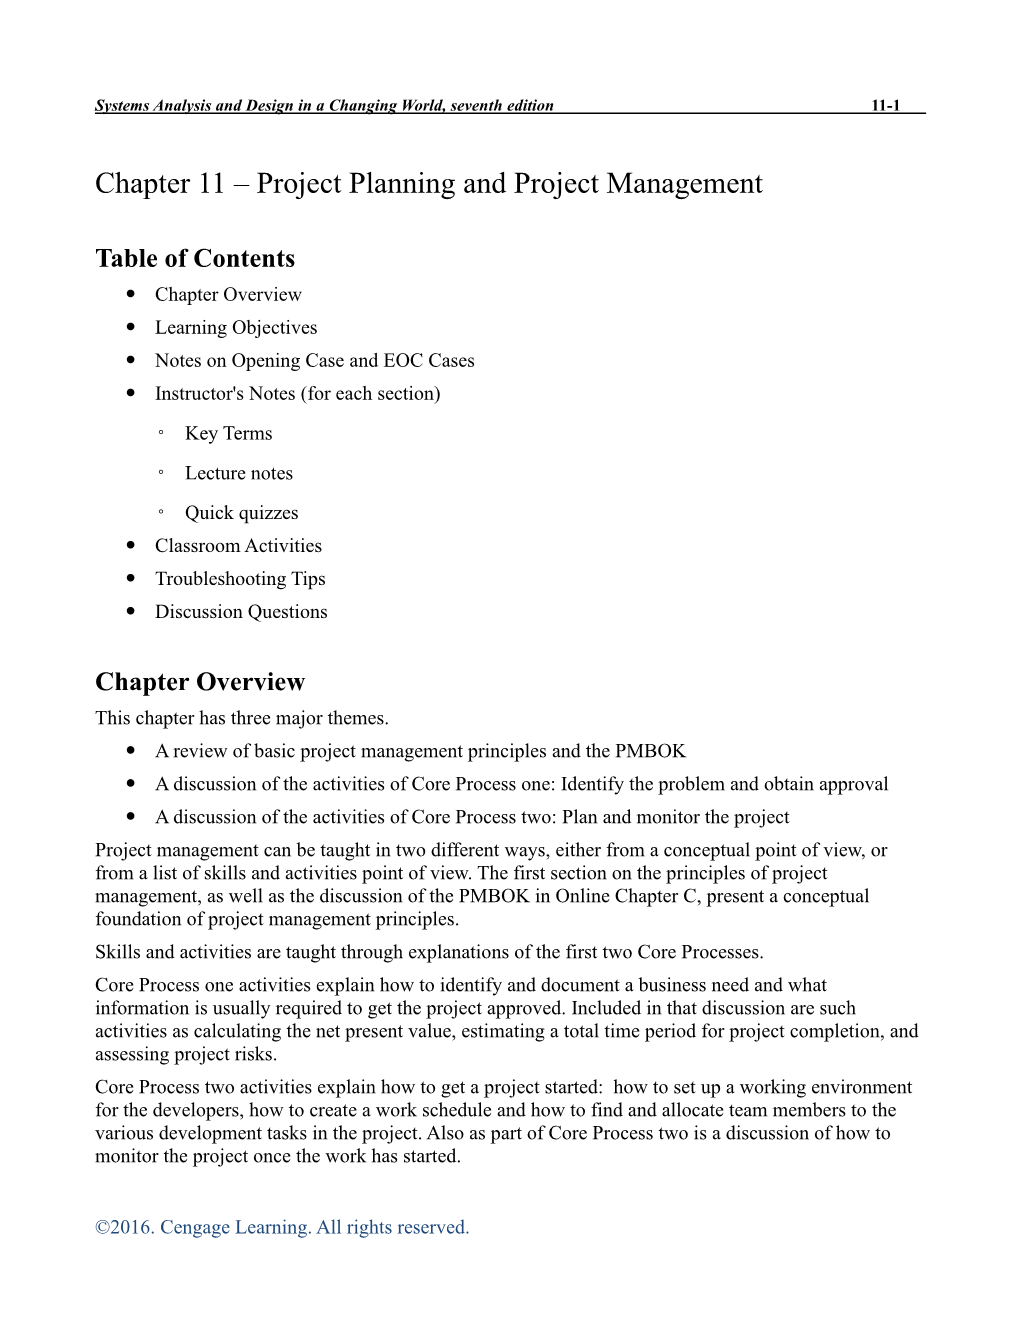 Chapter 11 – Project Planning and Project Management